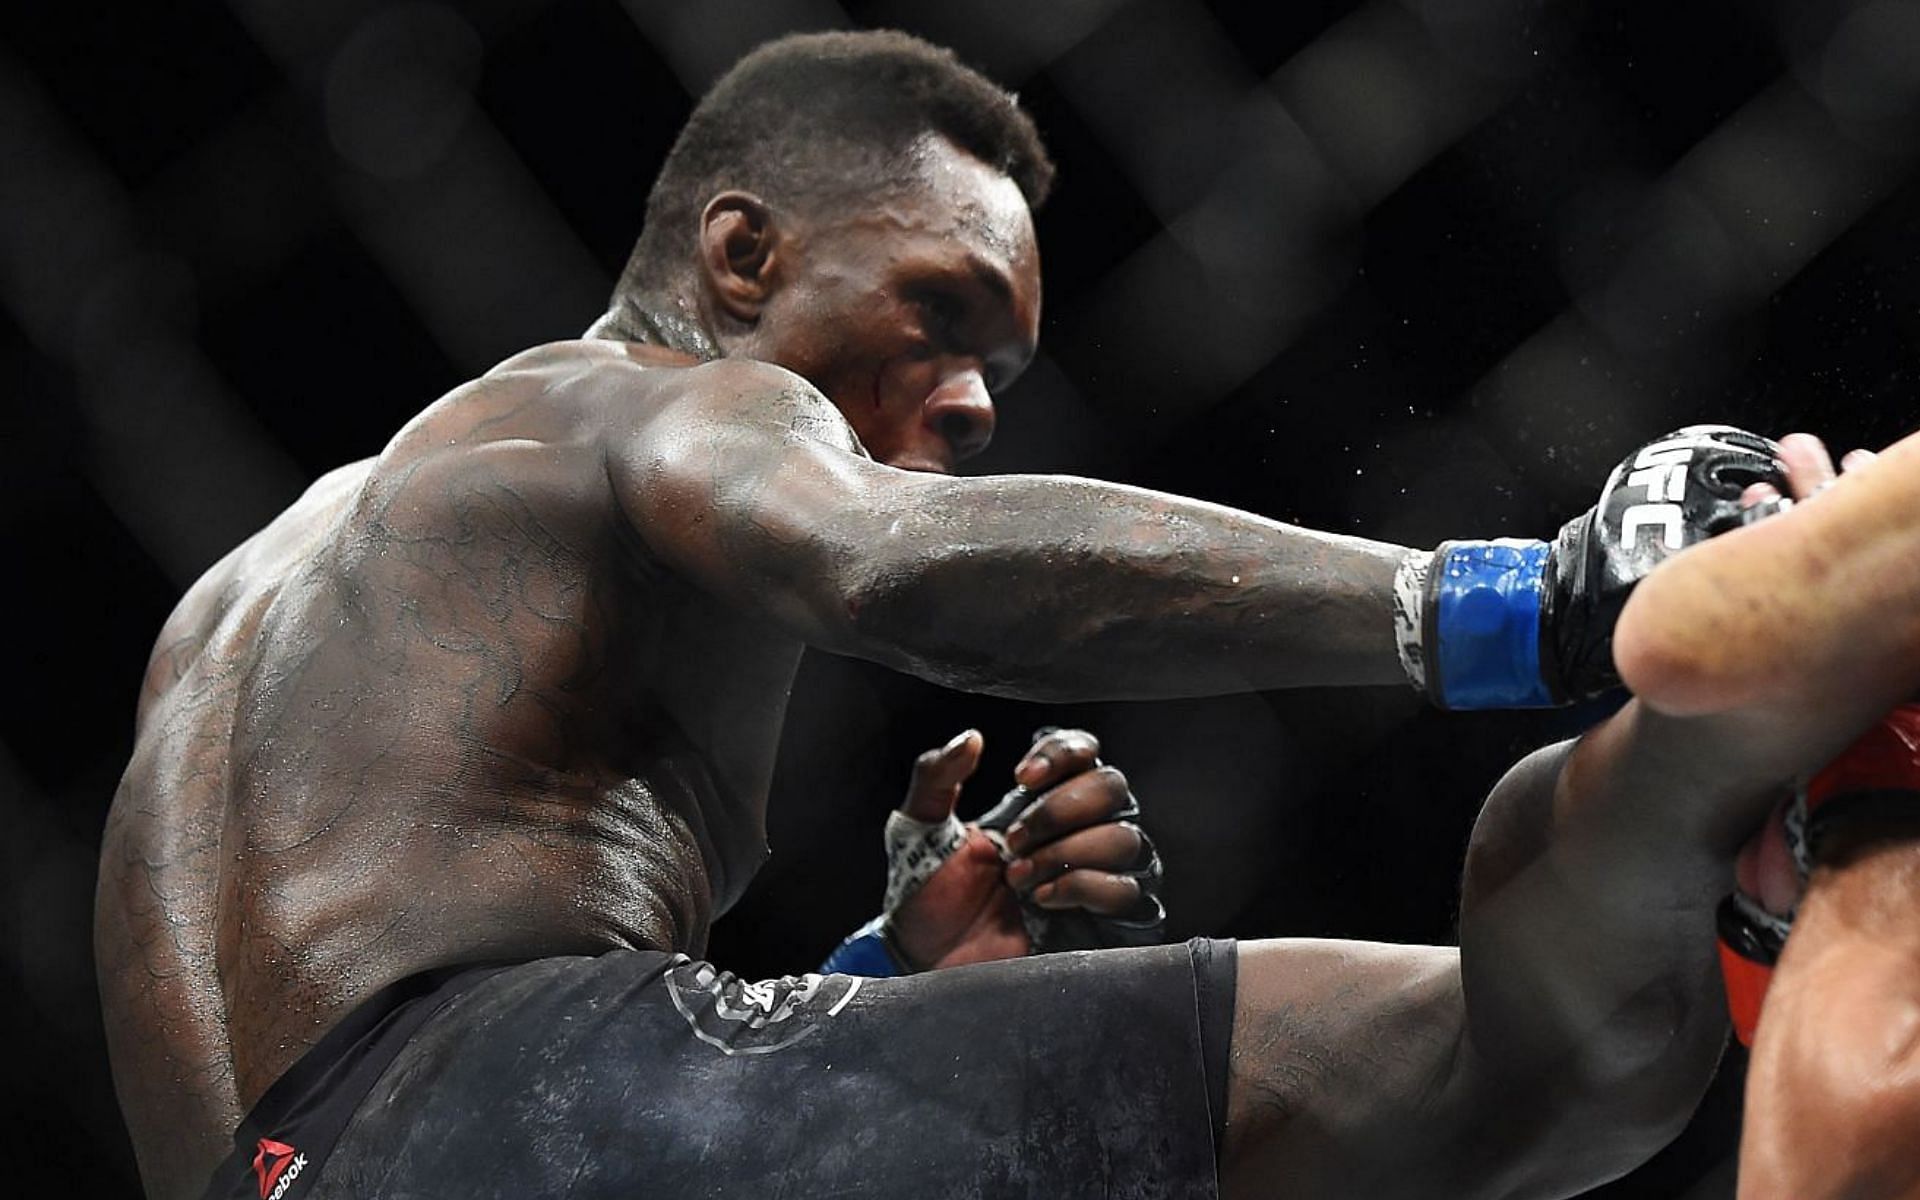 Israel Adesanya talks about the defining fights of his career